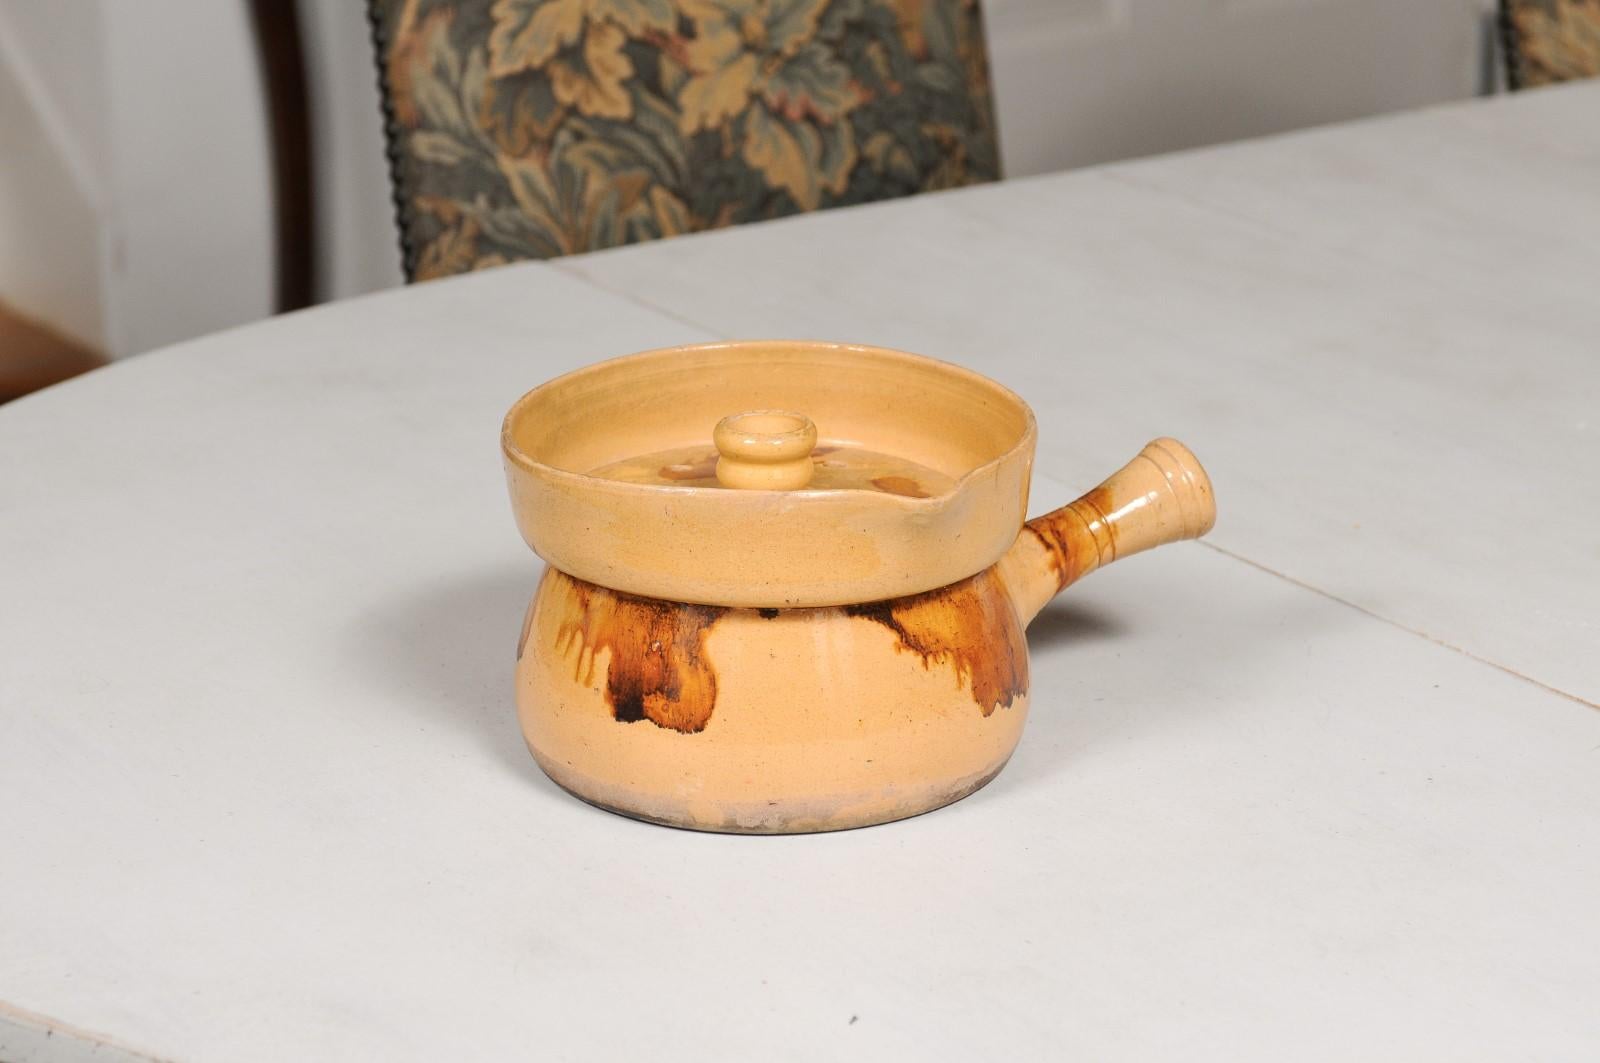 A French pottery steamer from the 19th century, with lid and rust accents. Created in France during the 19th century, this pottery steamer features a circular yellow glazed body adorned with rust toned accents. Topped with a lid and showcasing a